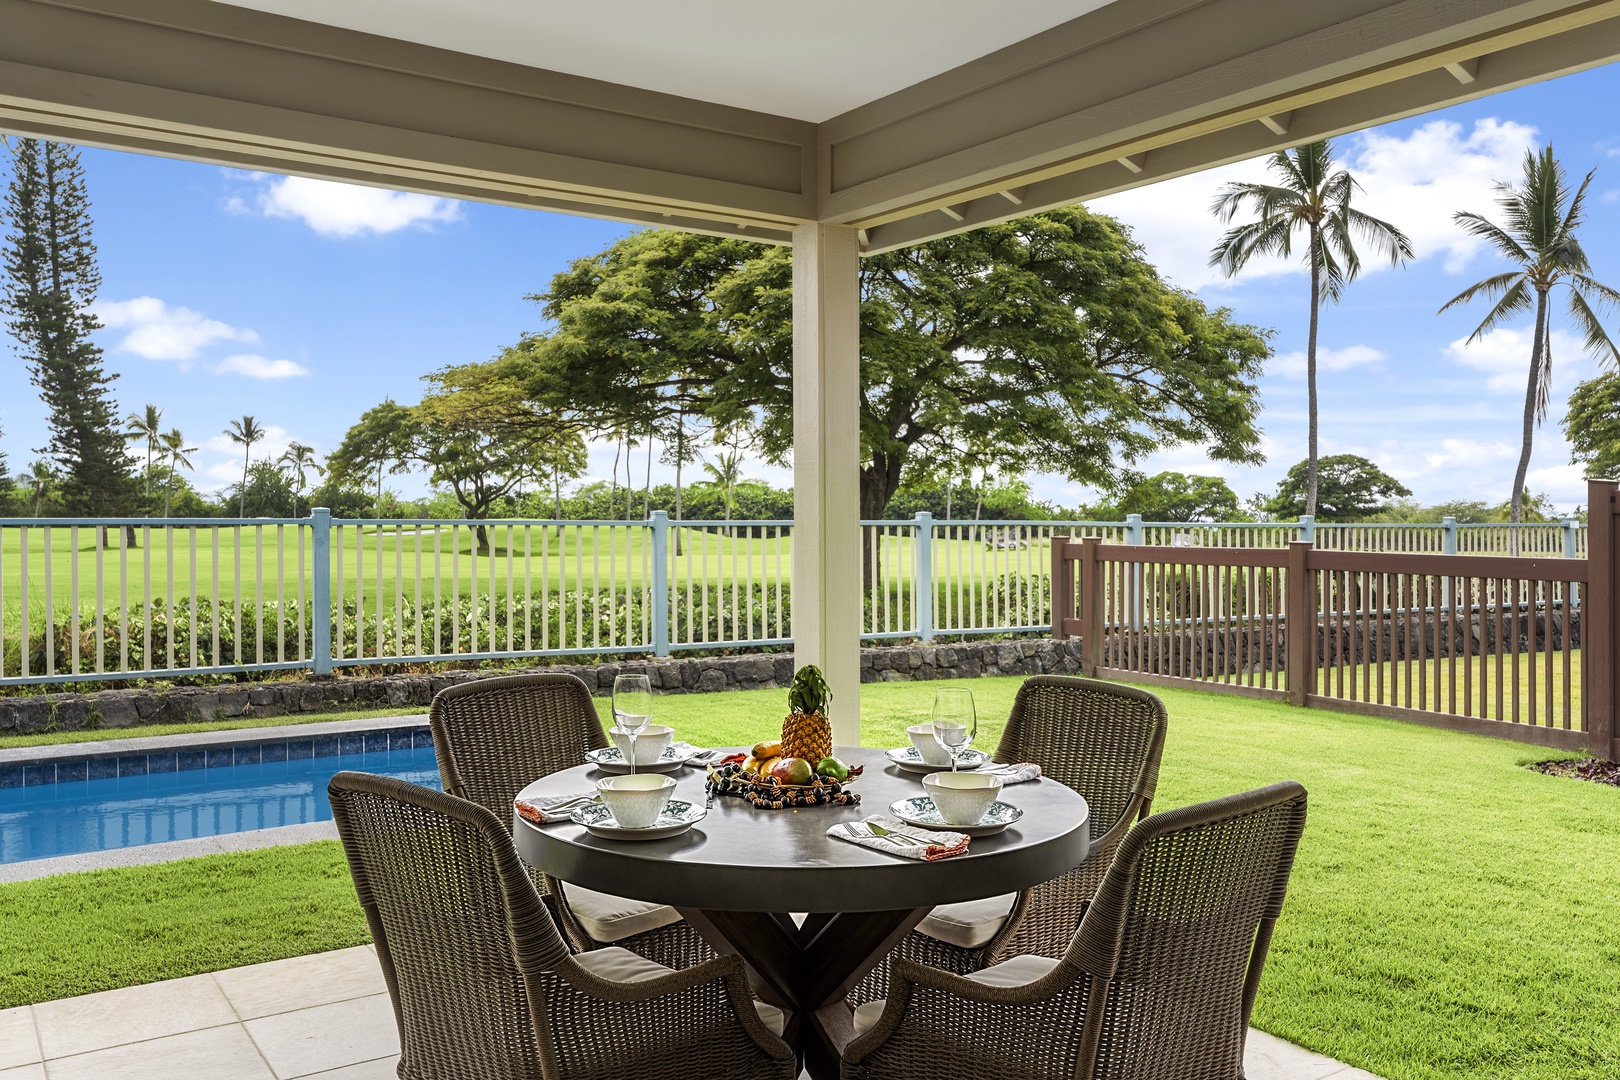 Kailua-Kona Vacation Rentals, Holua Kai #8 - Lanai with dining table overlooking the pool and the Golf Course